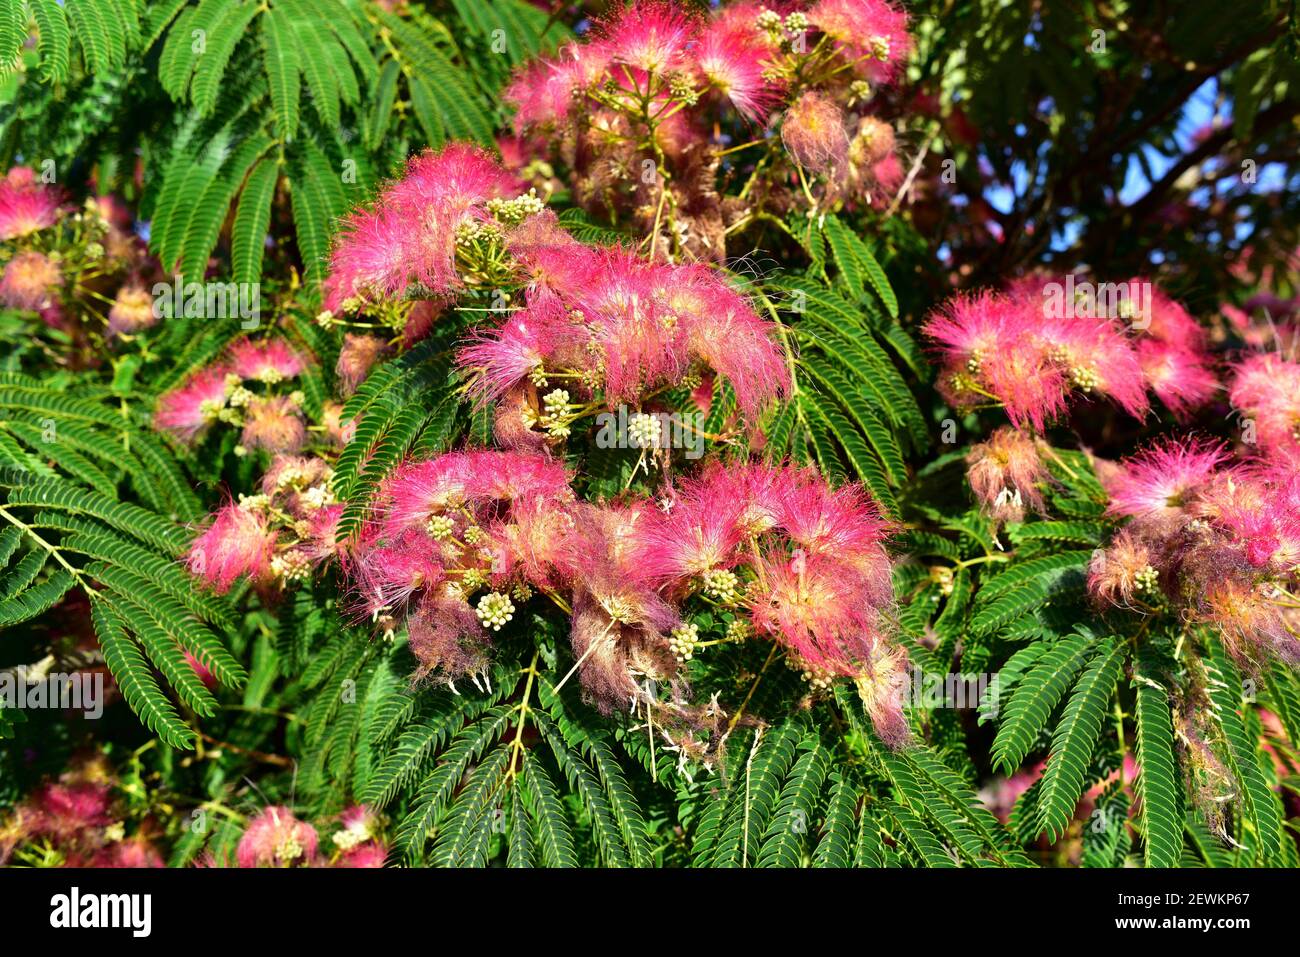 Persian silk tree or pink silk tree (Albizia julibrissin) is an ornamental deciduous tree native to Asia. Flowers and leaves detail. Stock Photo